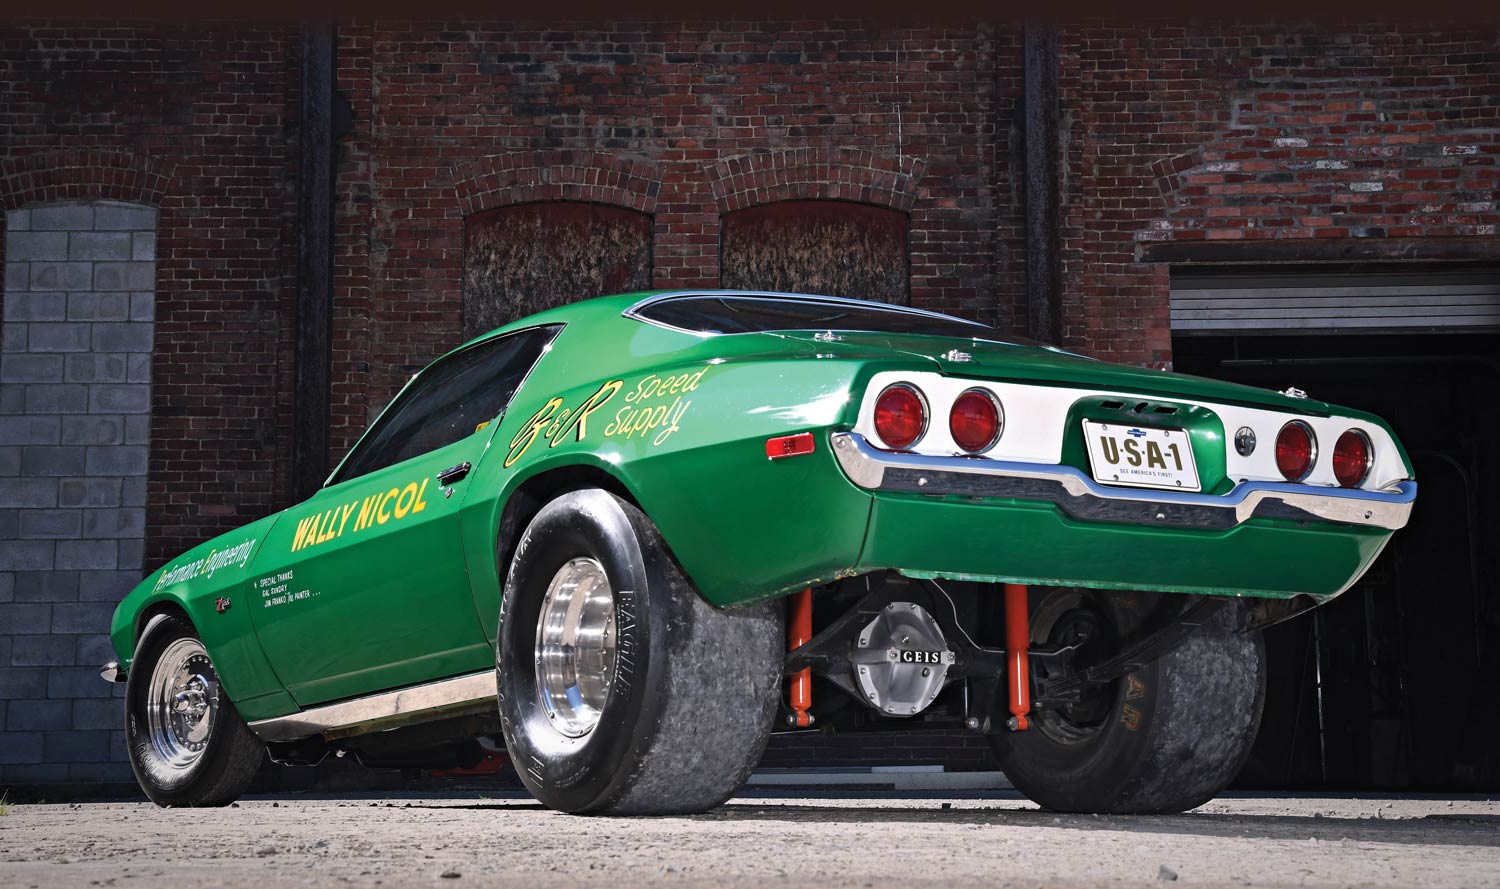 Rear side view of the - 1972 Chevy Camaro